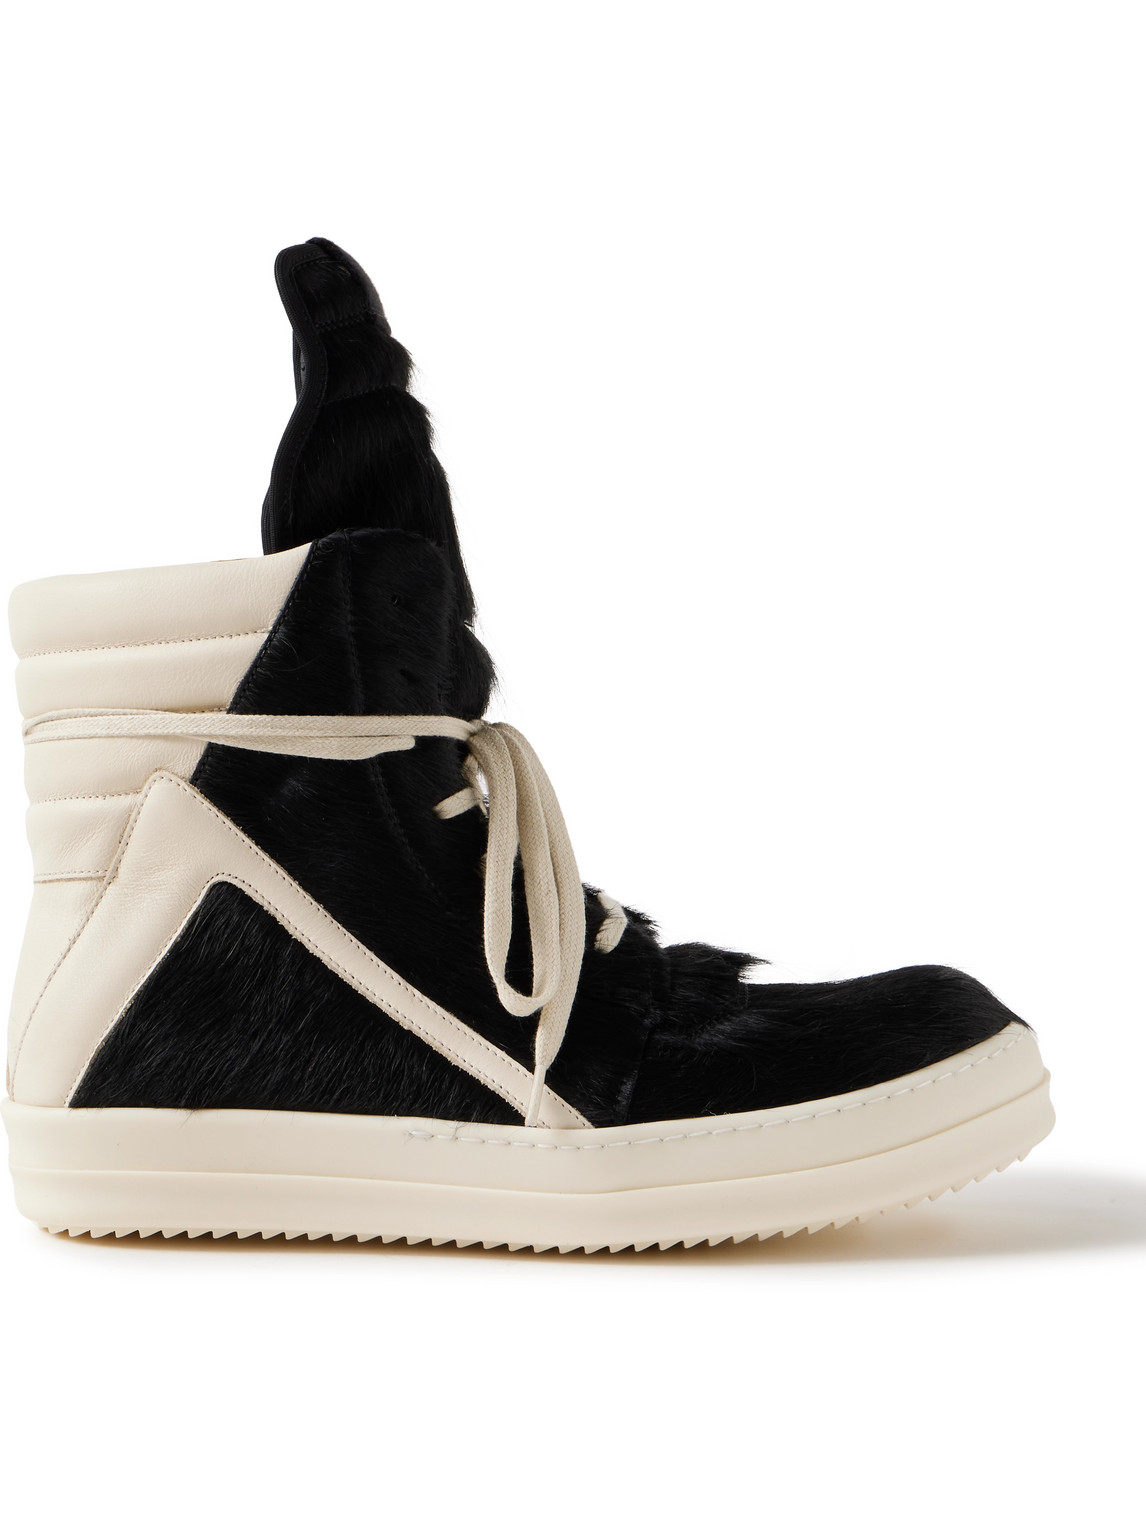 Rick Owens Geobasket Calf Hair And Leather High-top Trainers In Black